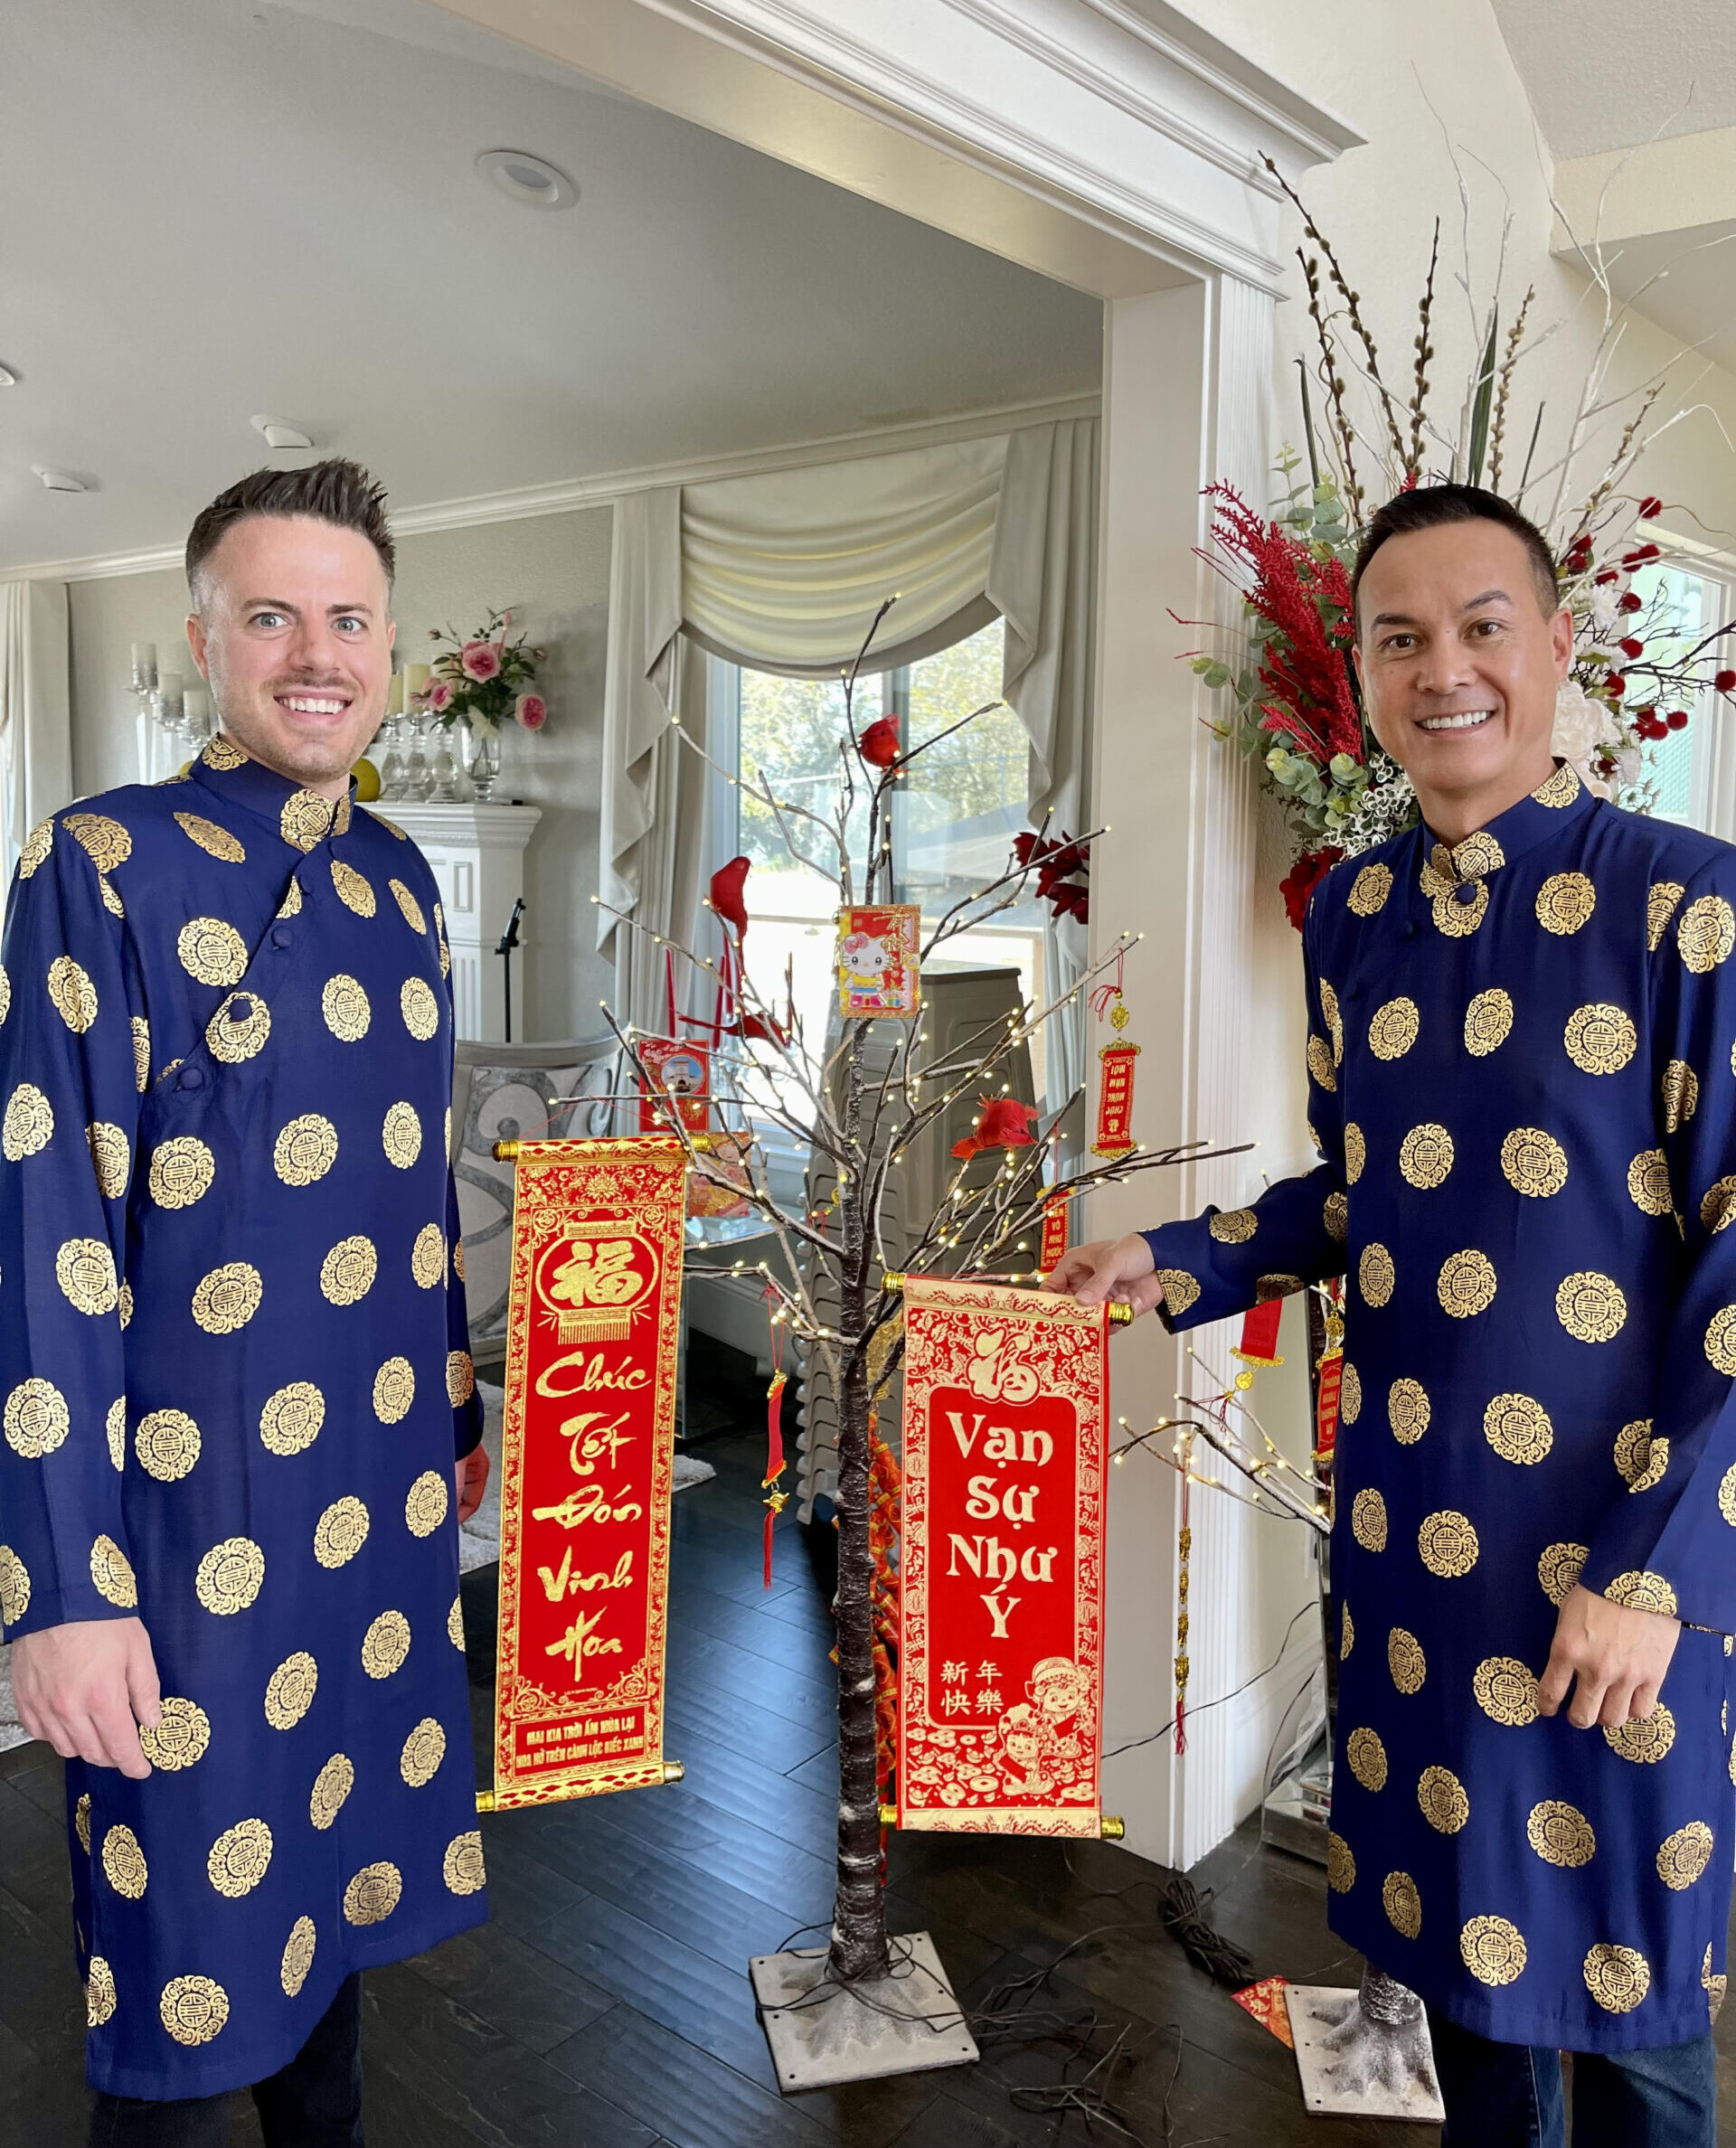 The couple wearing their áo dais for Tết, wishing in blessings and prosperity.